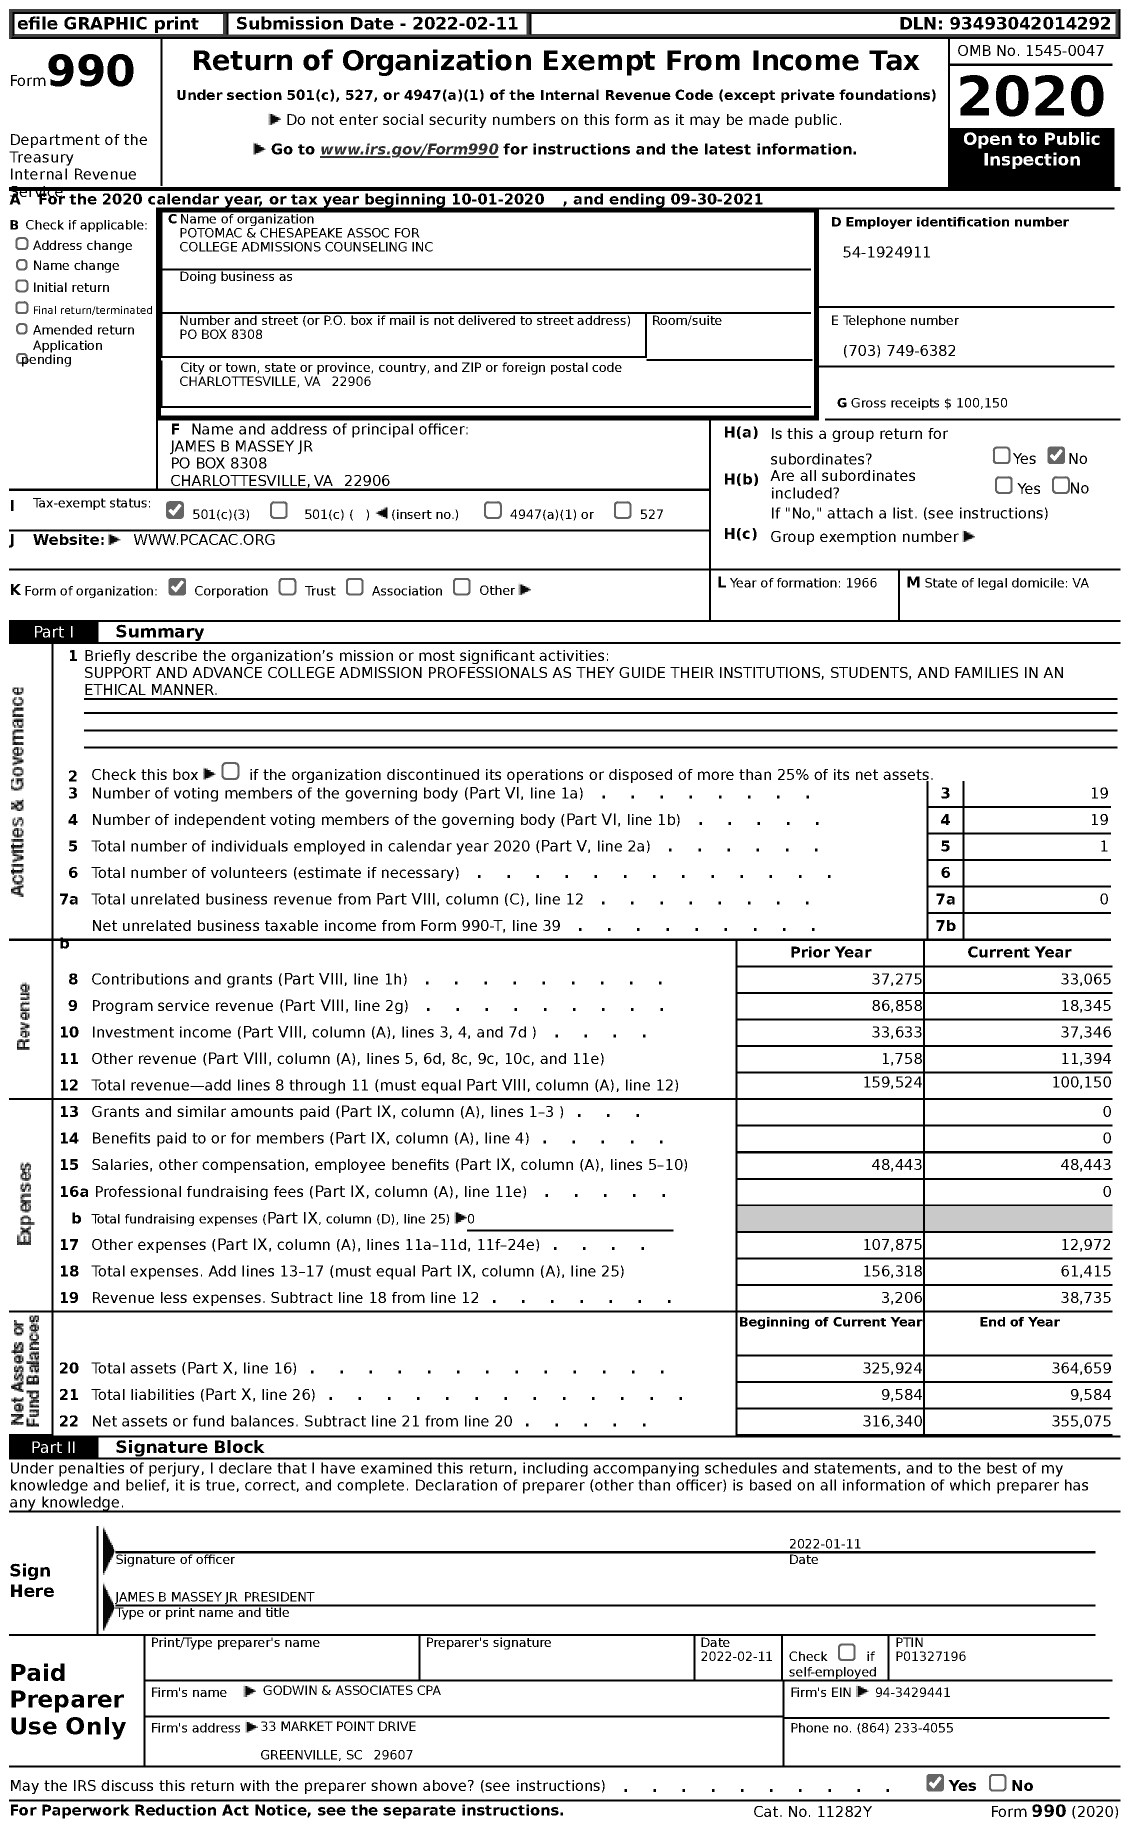 Image of first page of 2020 Form 990 for Potomac and Chesapeake Association for College Admissions Counseling